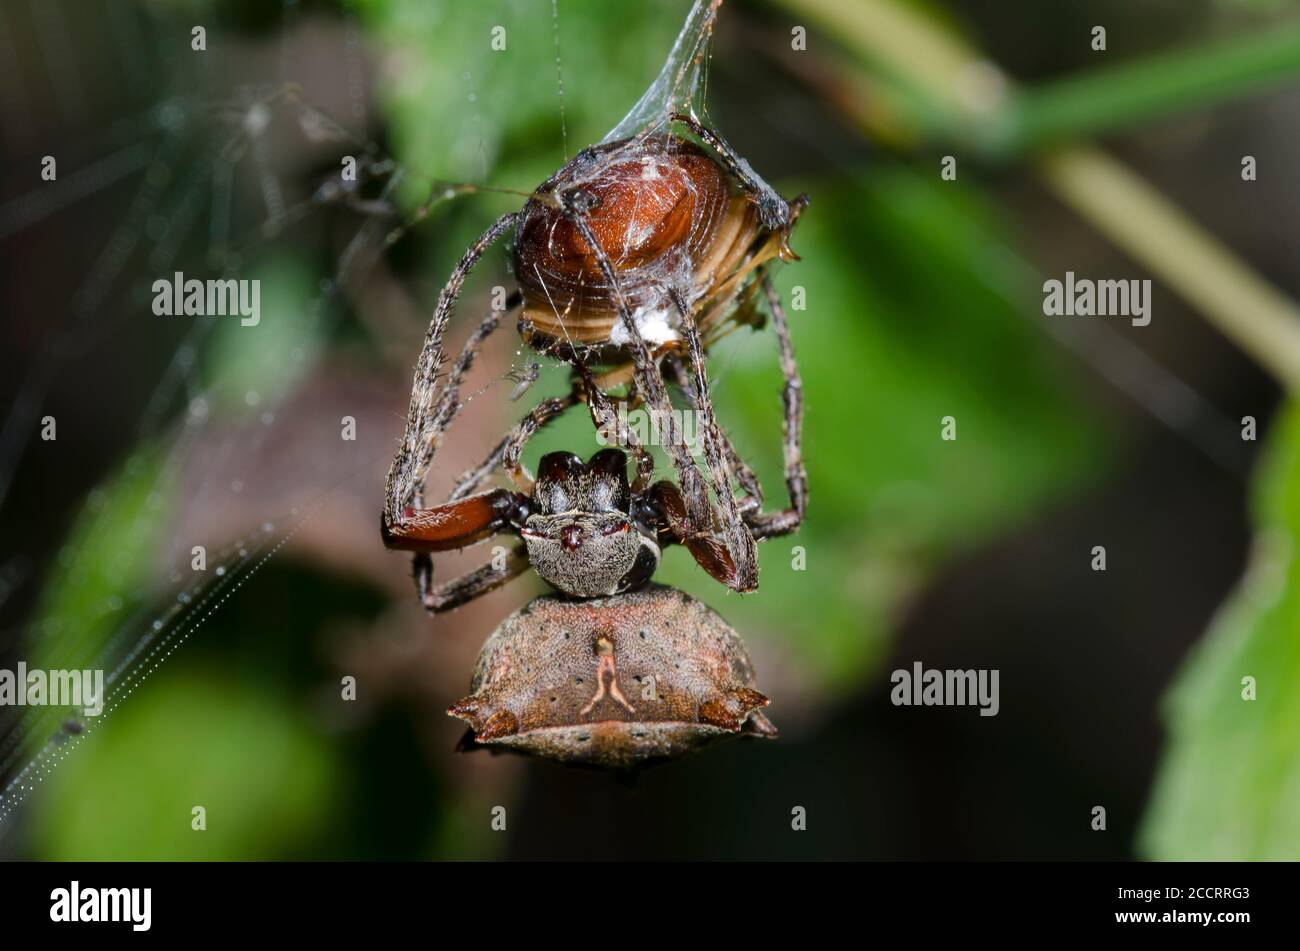 Starbellied Orbweaver, Acanthepeira sp., wrapping and capturing scarab beetle, Family Scarabaeidae, prey Stock Photo